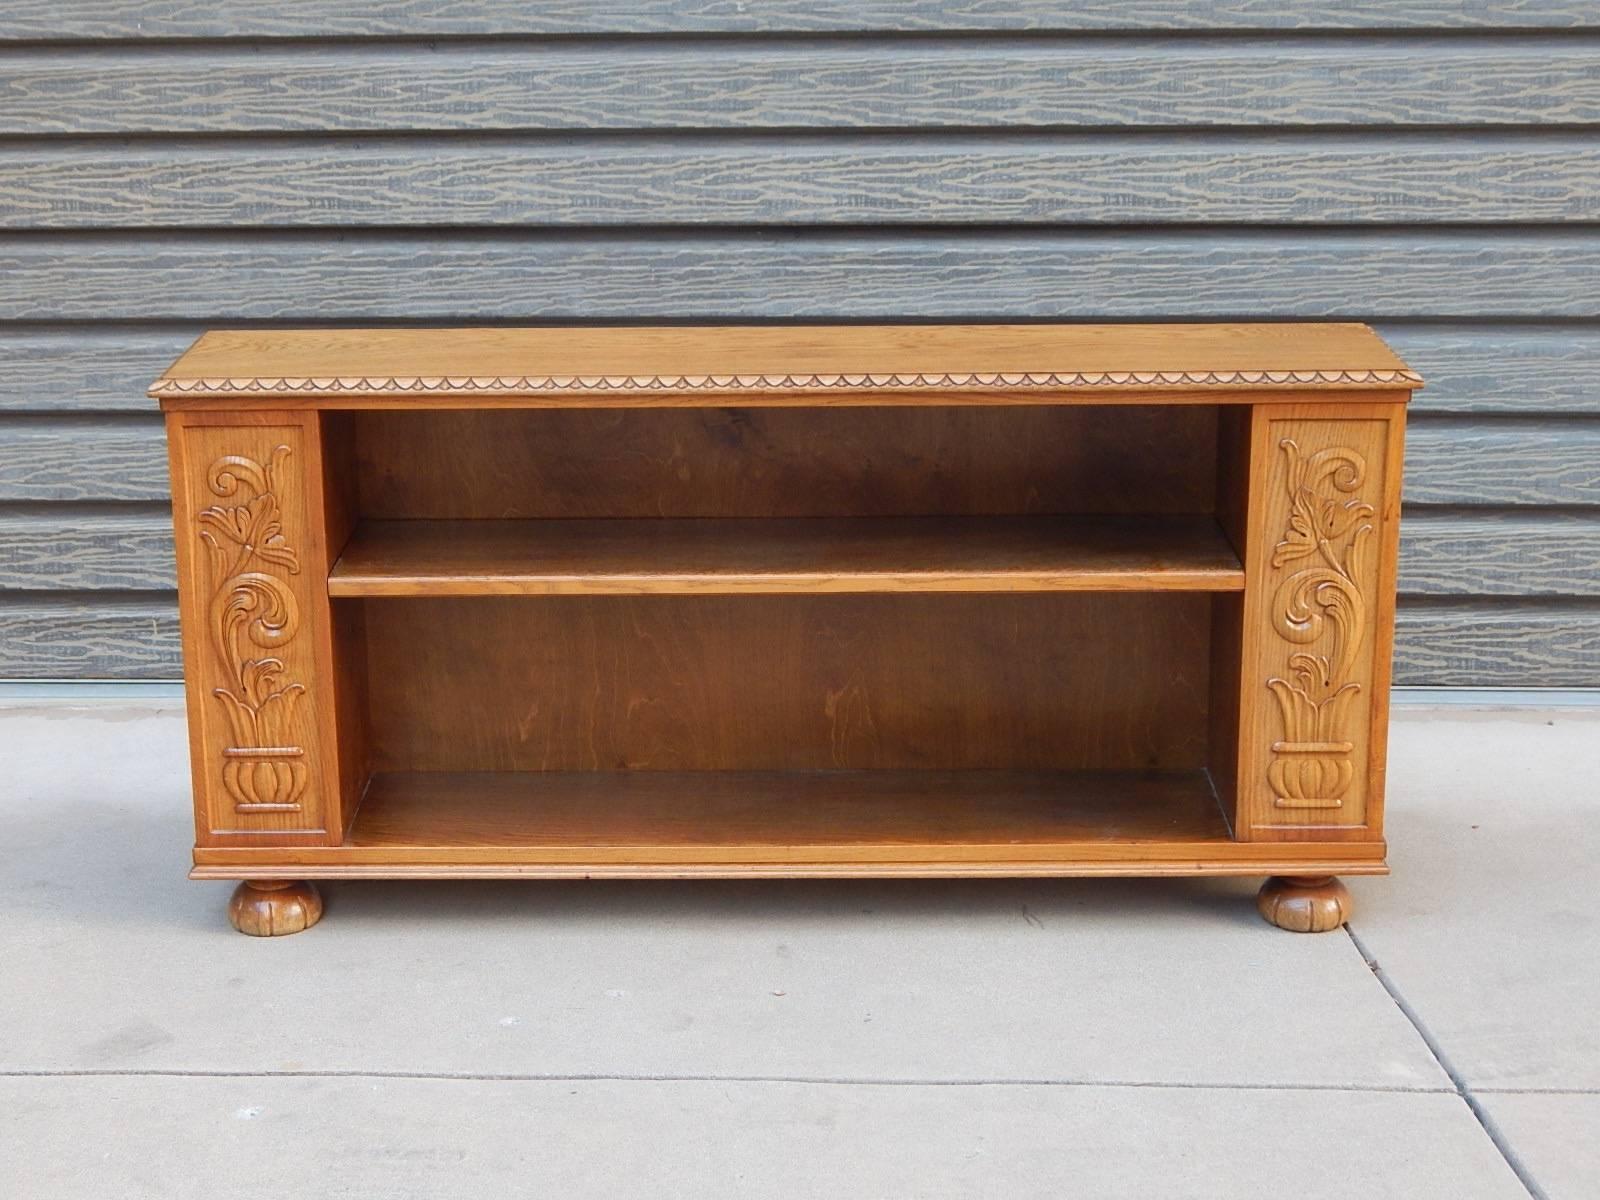 Swedish Arts & Crafts era book cabinet r case with three sides for storage. Shelf is removable. In oak and in excellent condition with very light wear, Sweden, circa 1910.